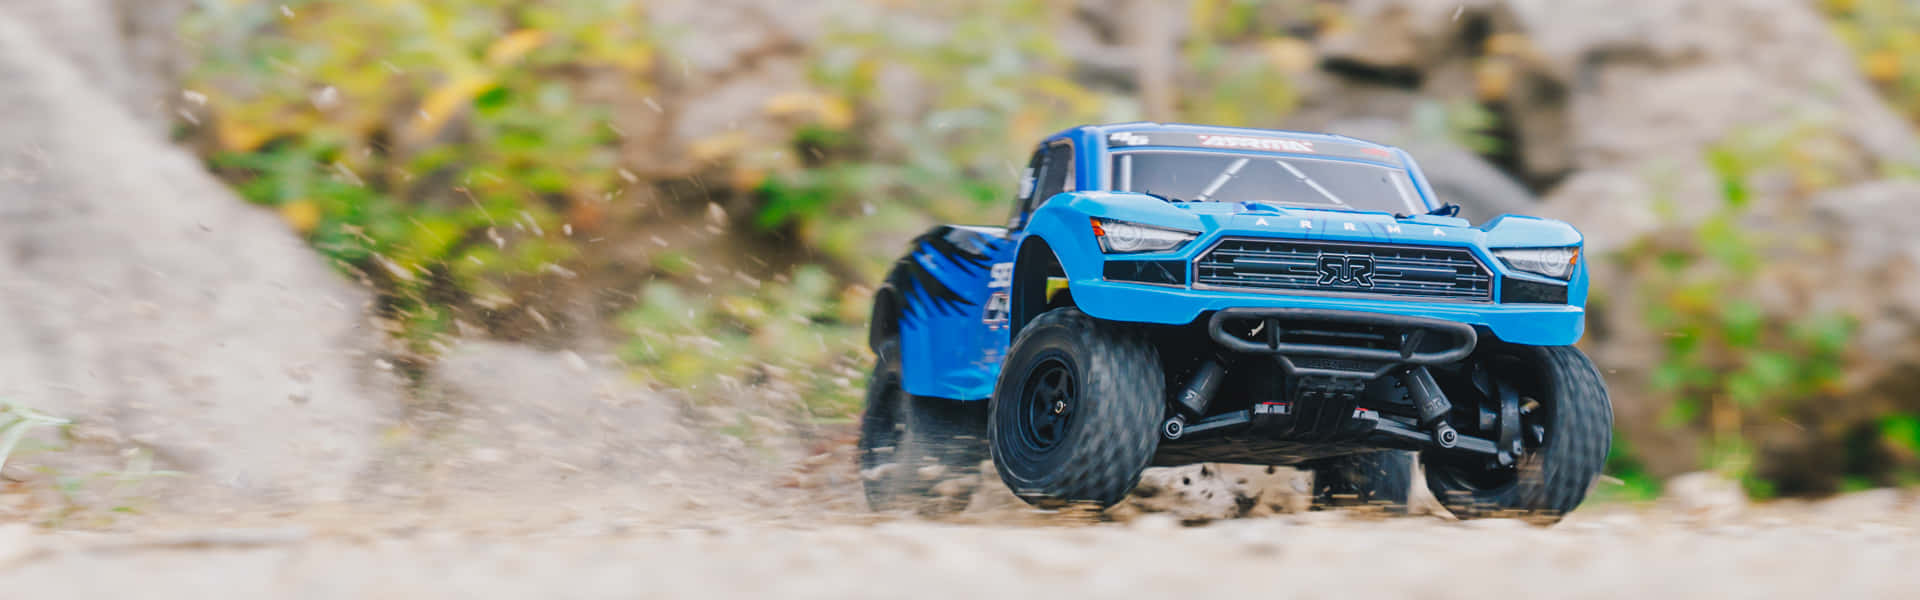 A Blue Toy Truck Is Driving Down A Dirt Road